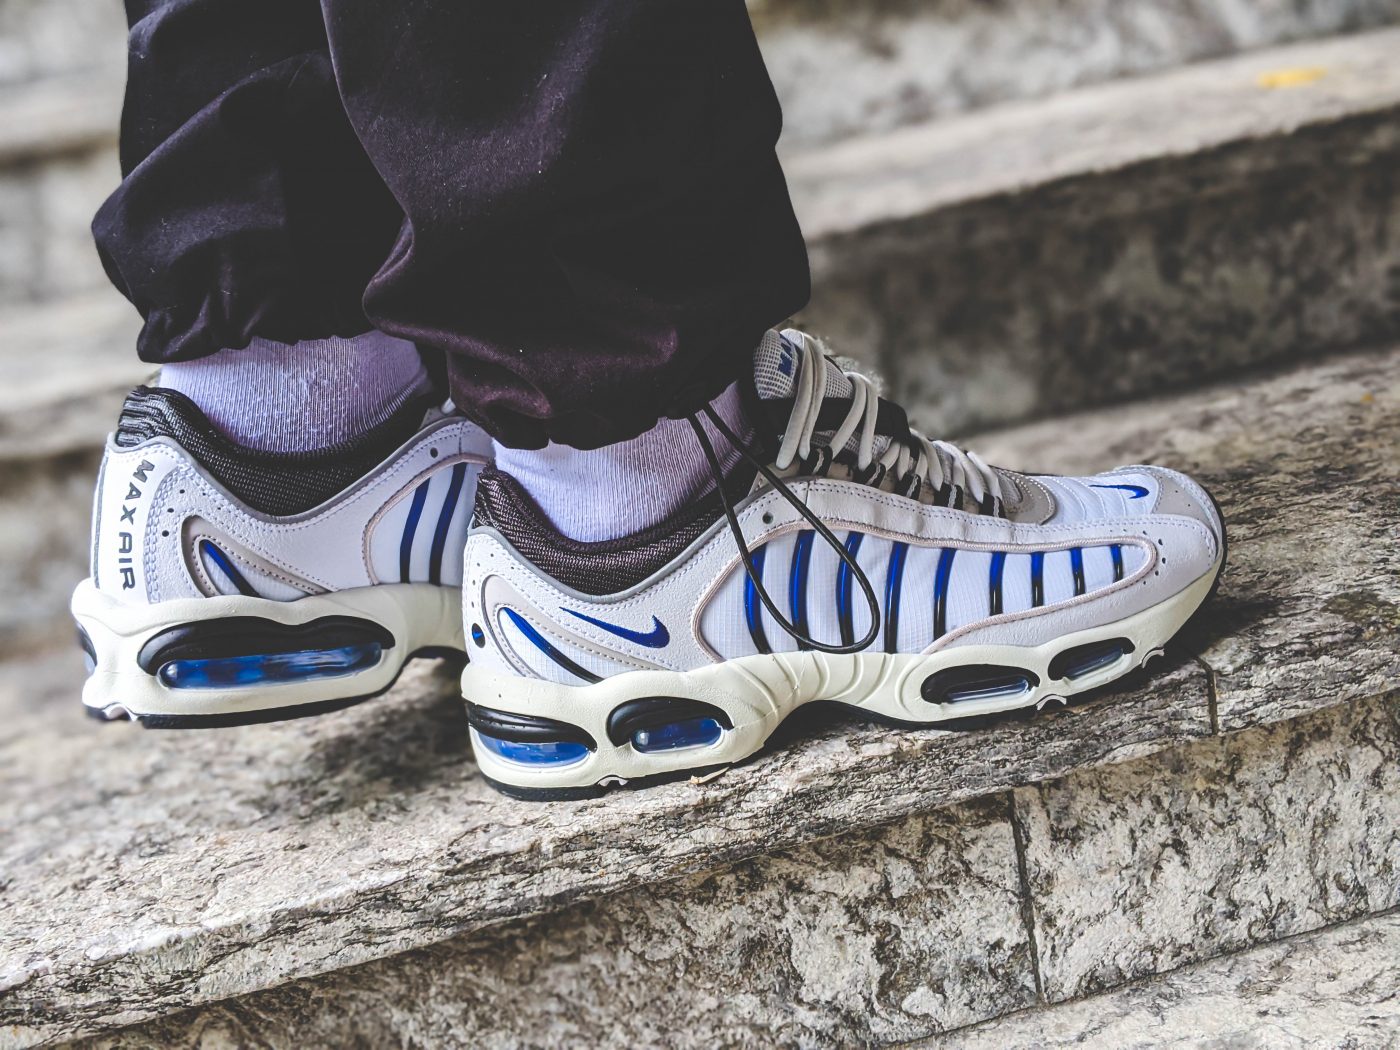 Latest Pickup: Air Max Tailwind IV "Racer Blue" |